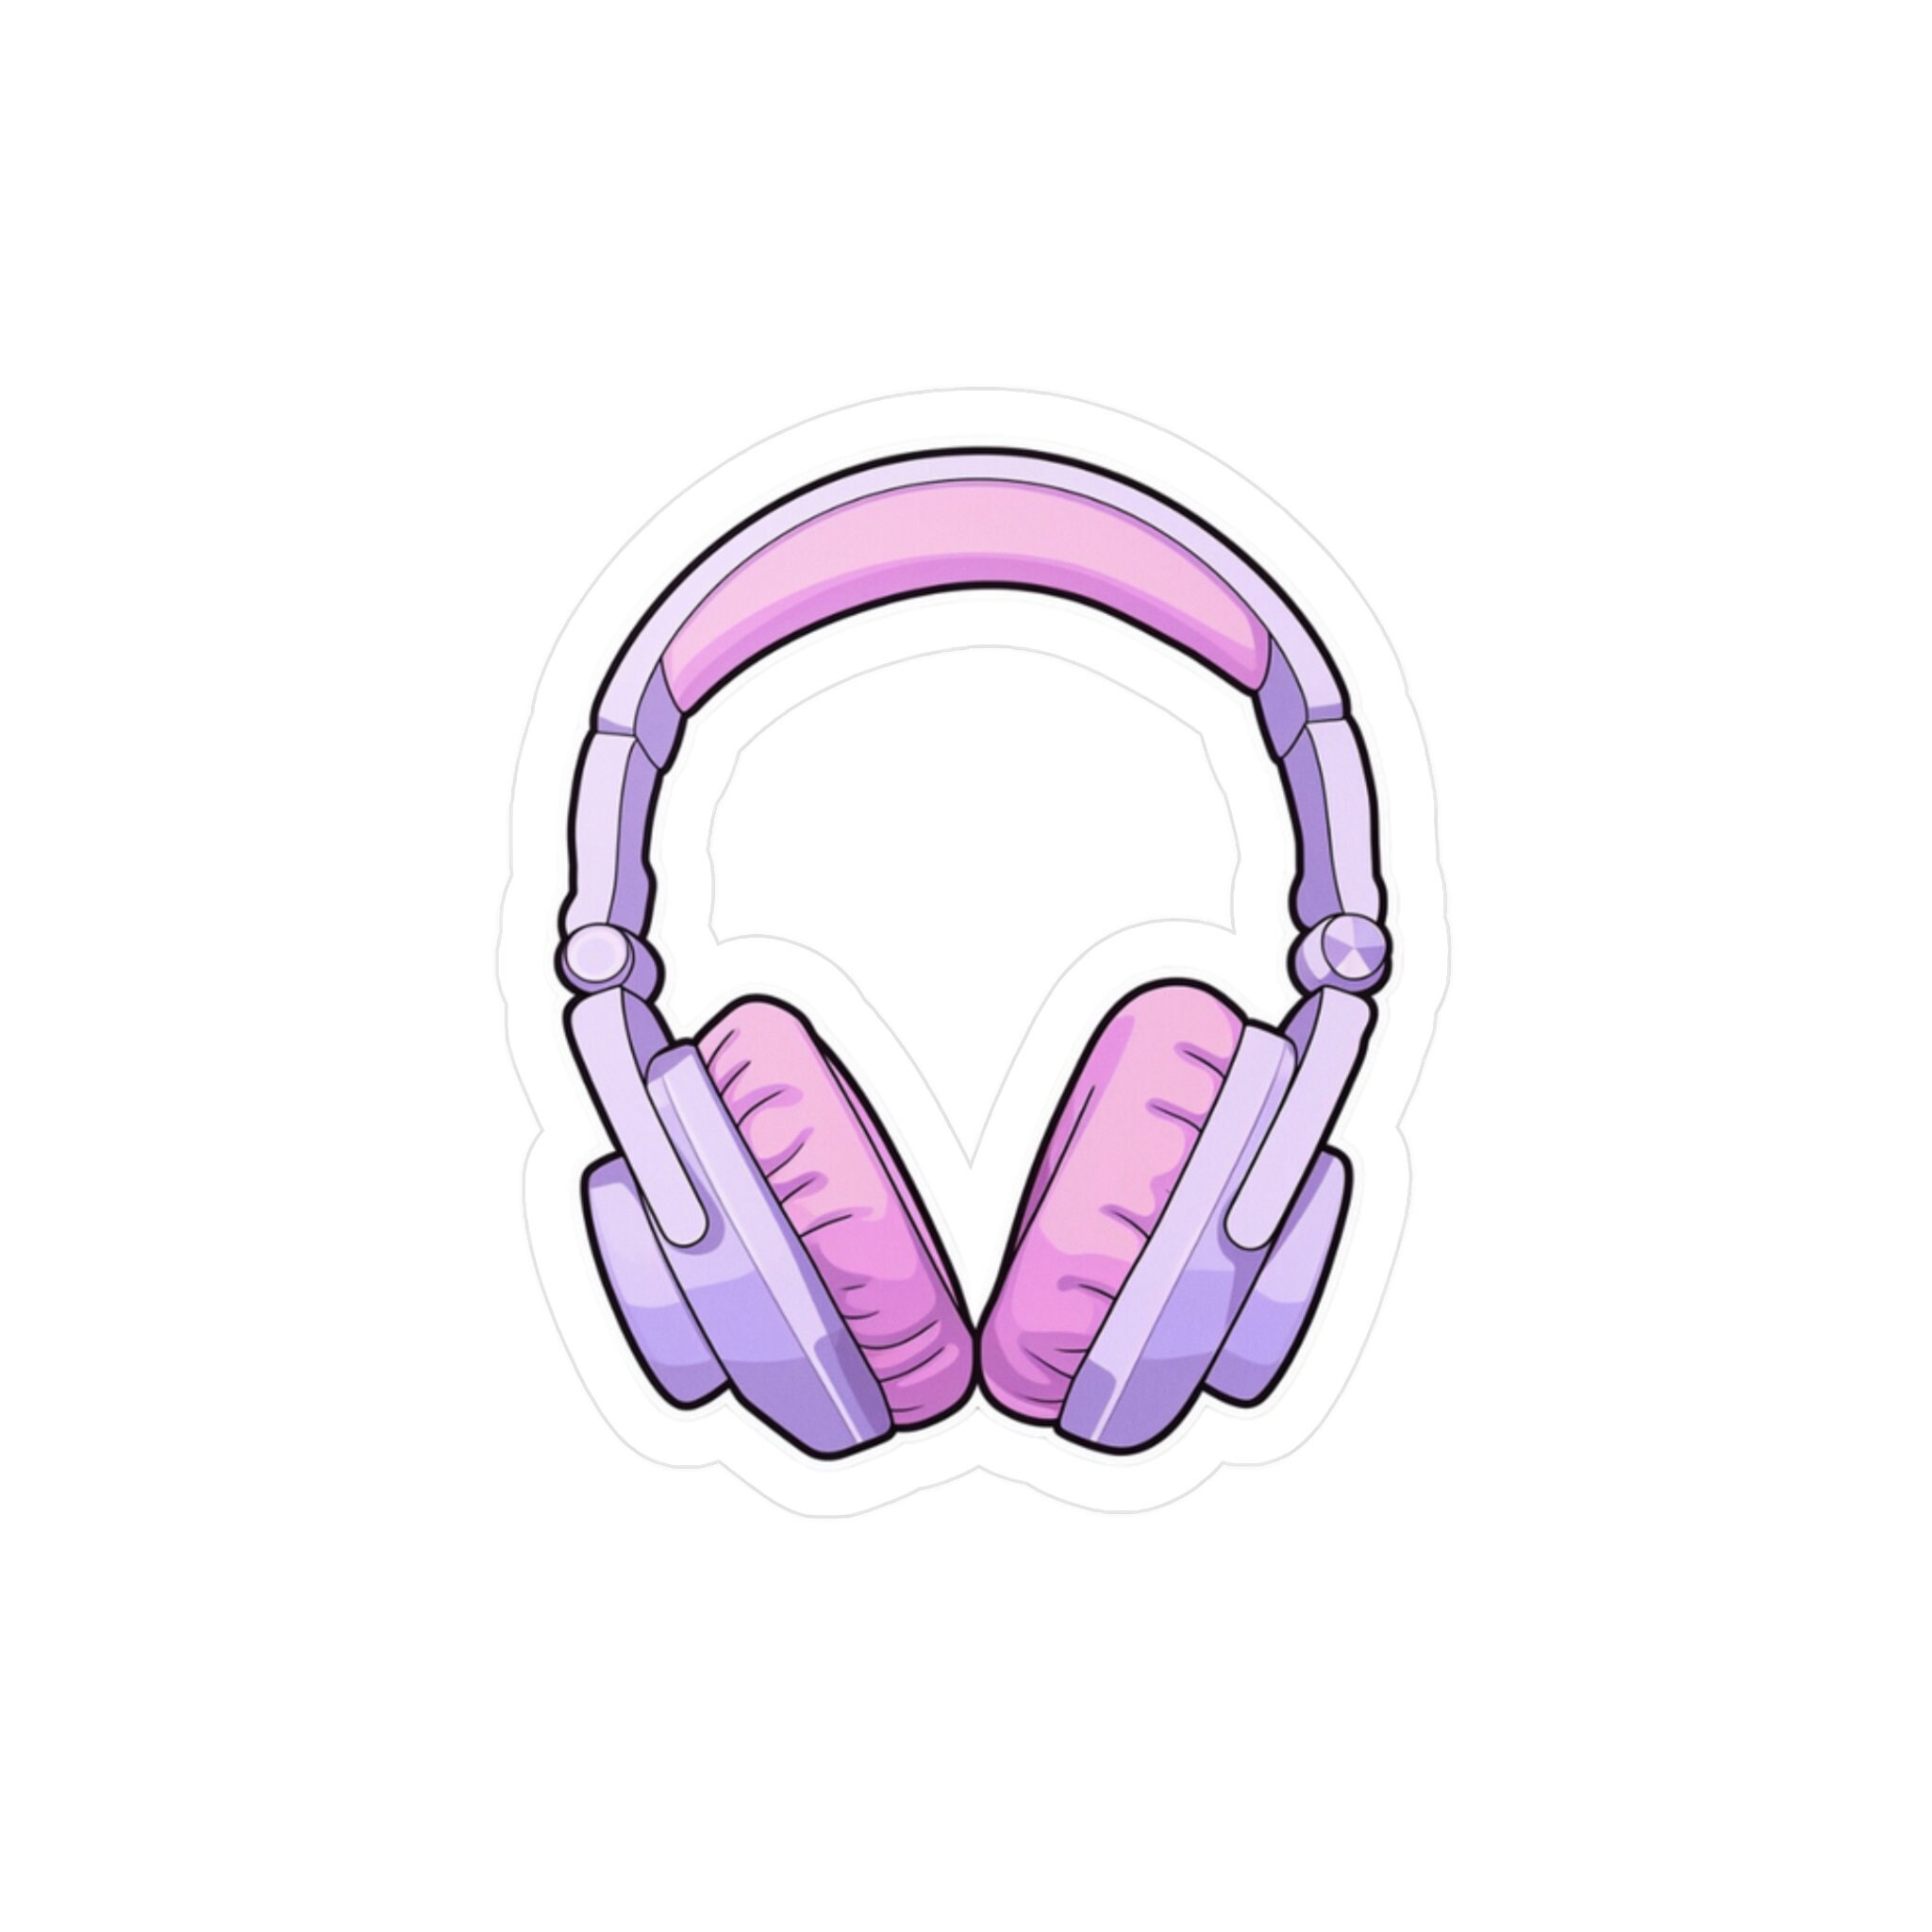 Pink Headphones Stickers for Sale